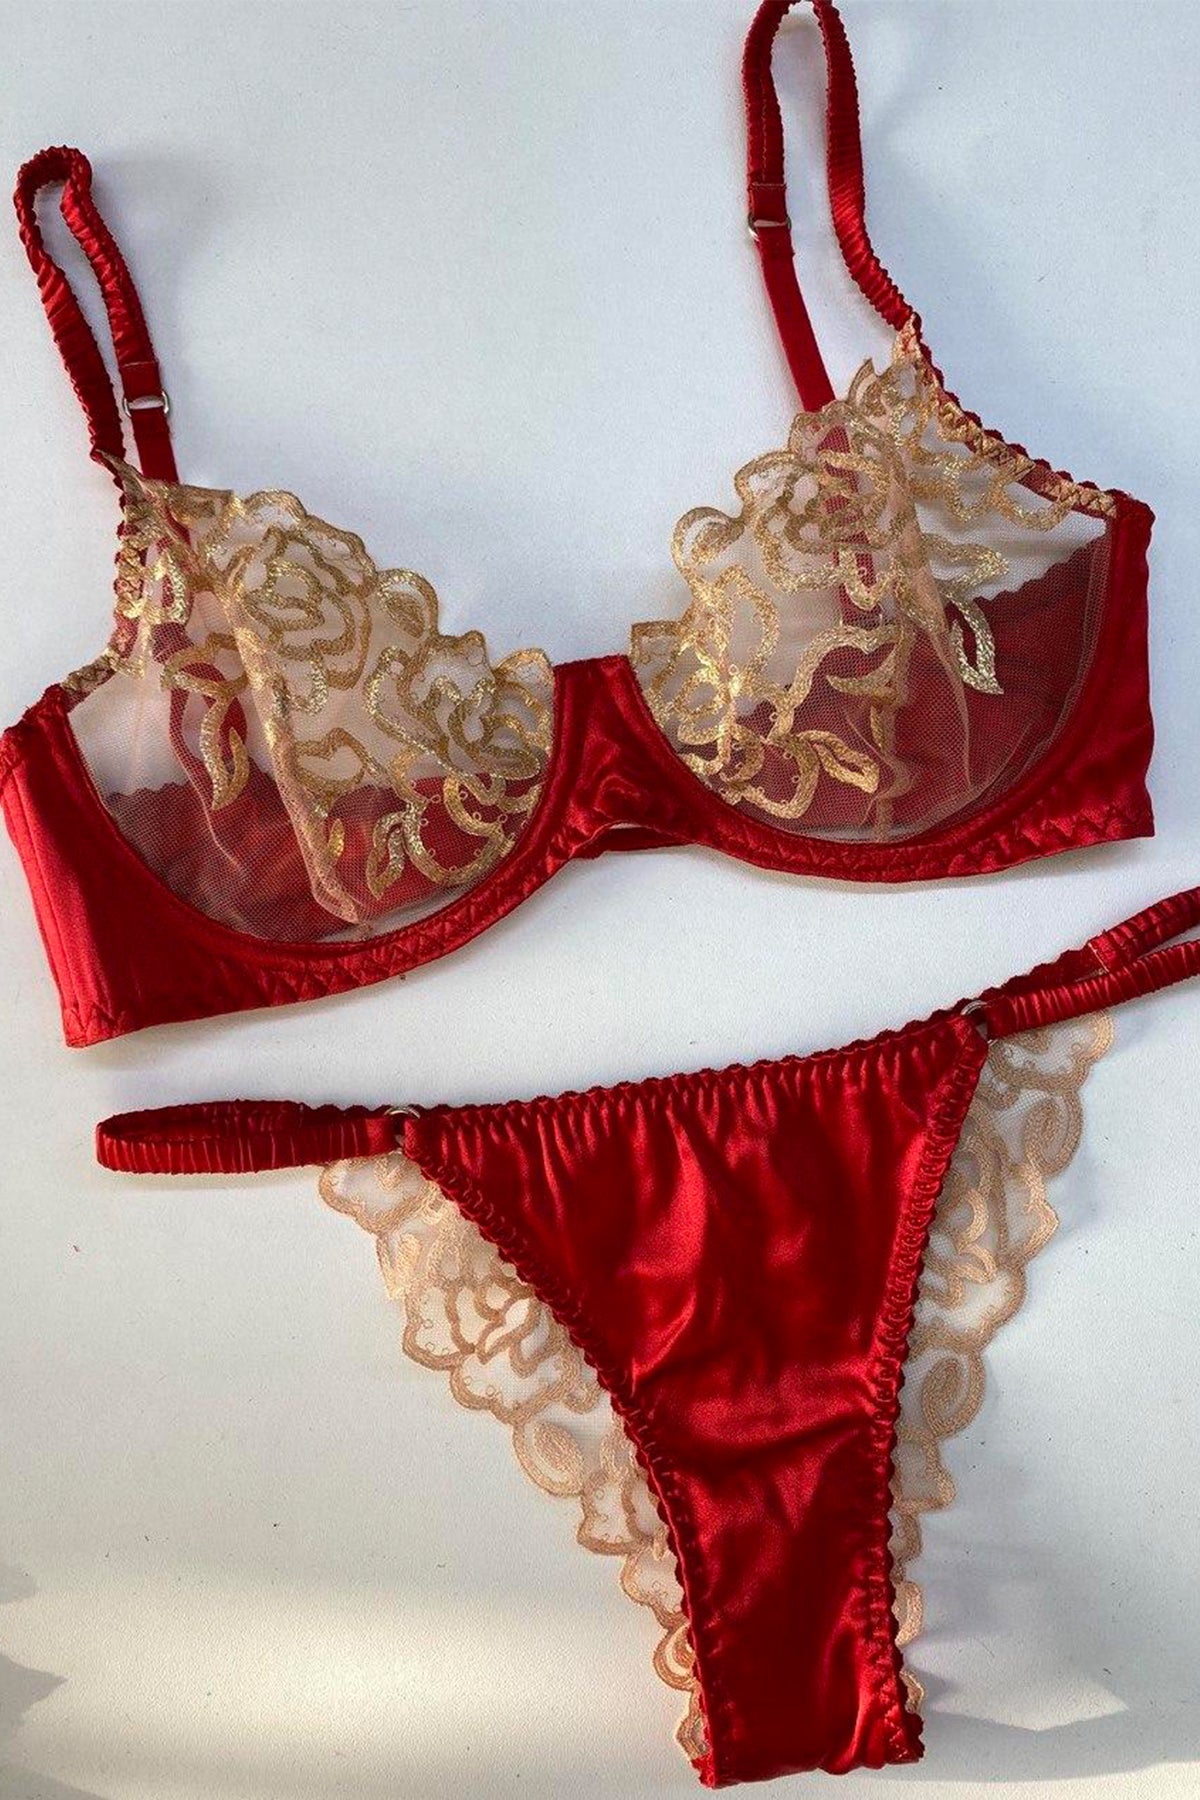 Shop Clarissa Red silk and Gold Lace Lingerie Set – Angie's showroom –  Angie's Showroom